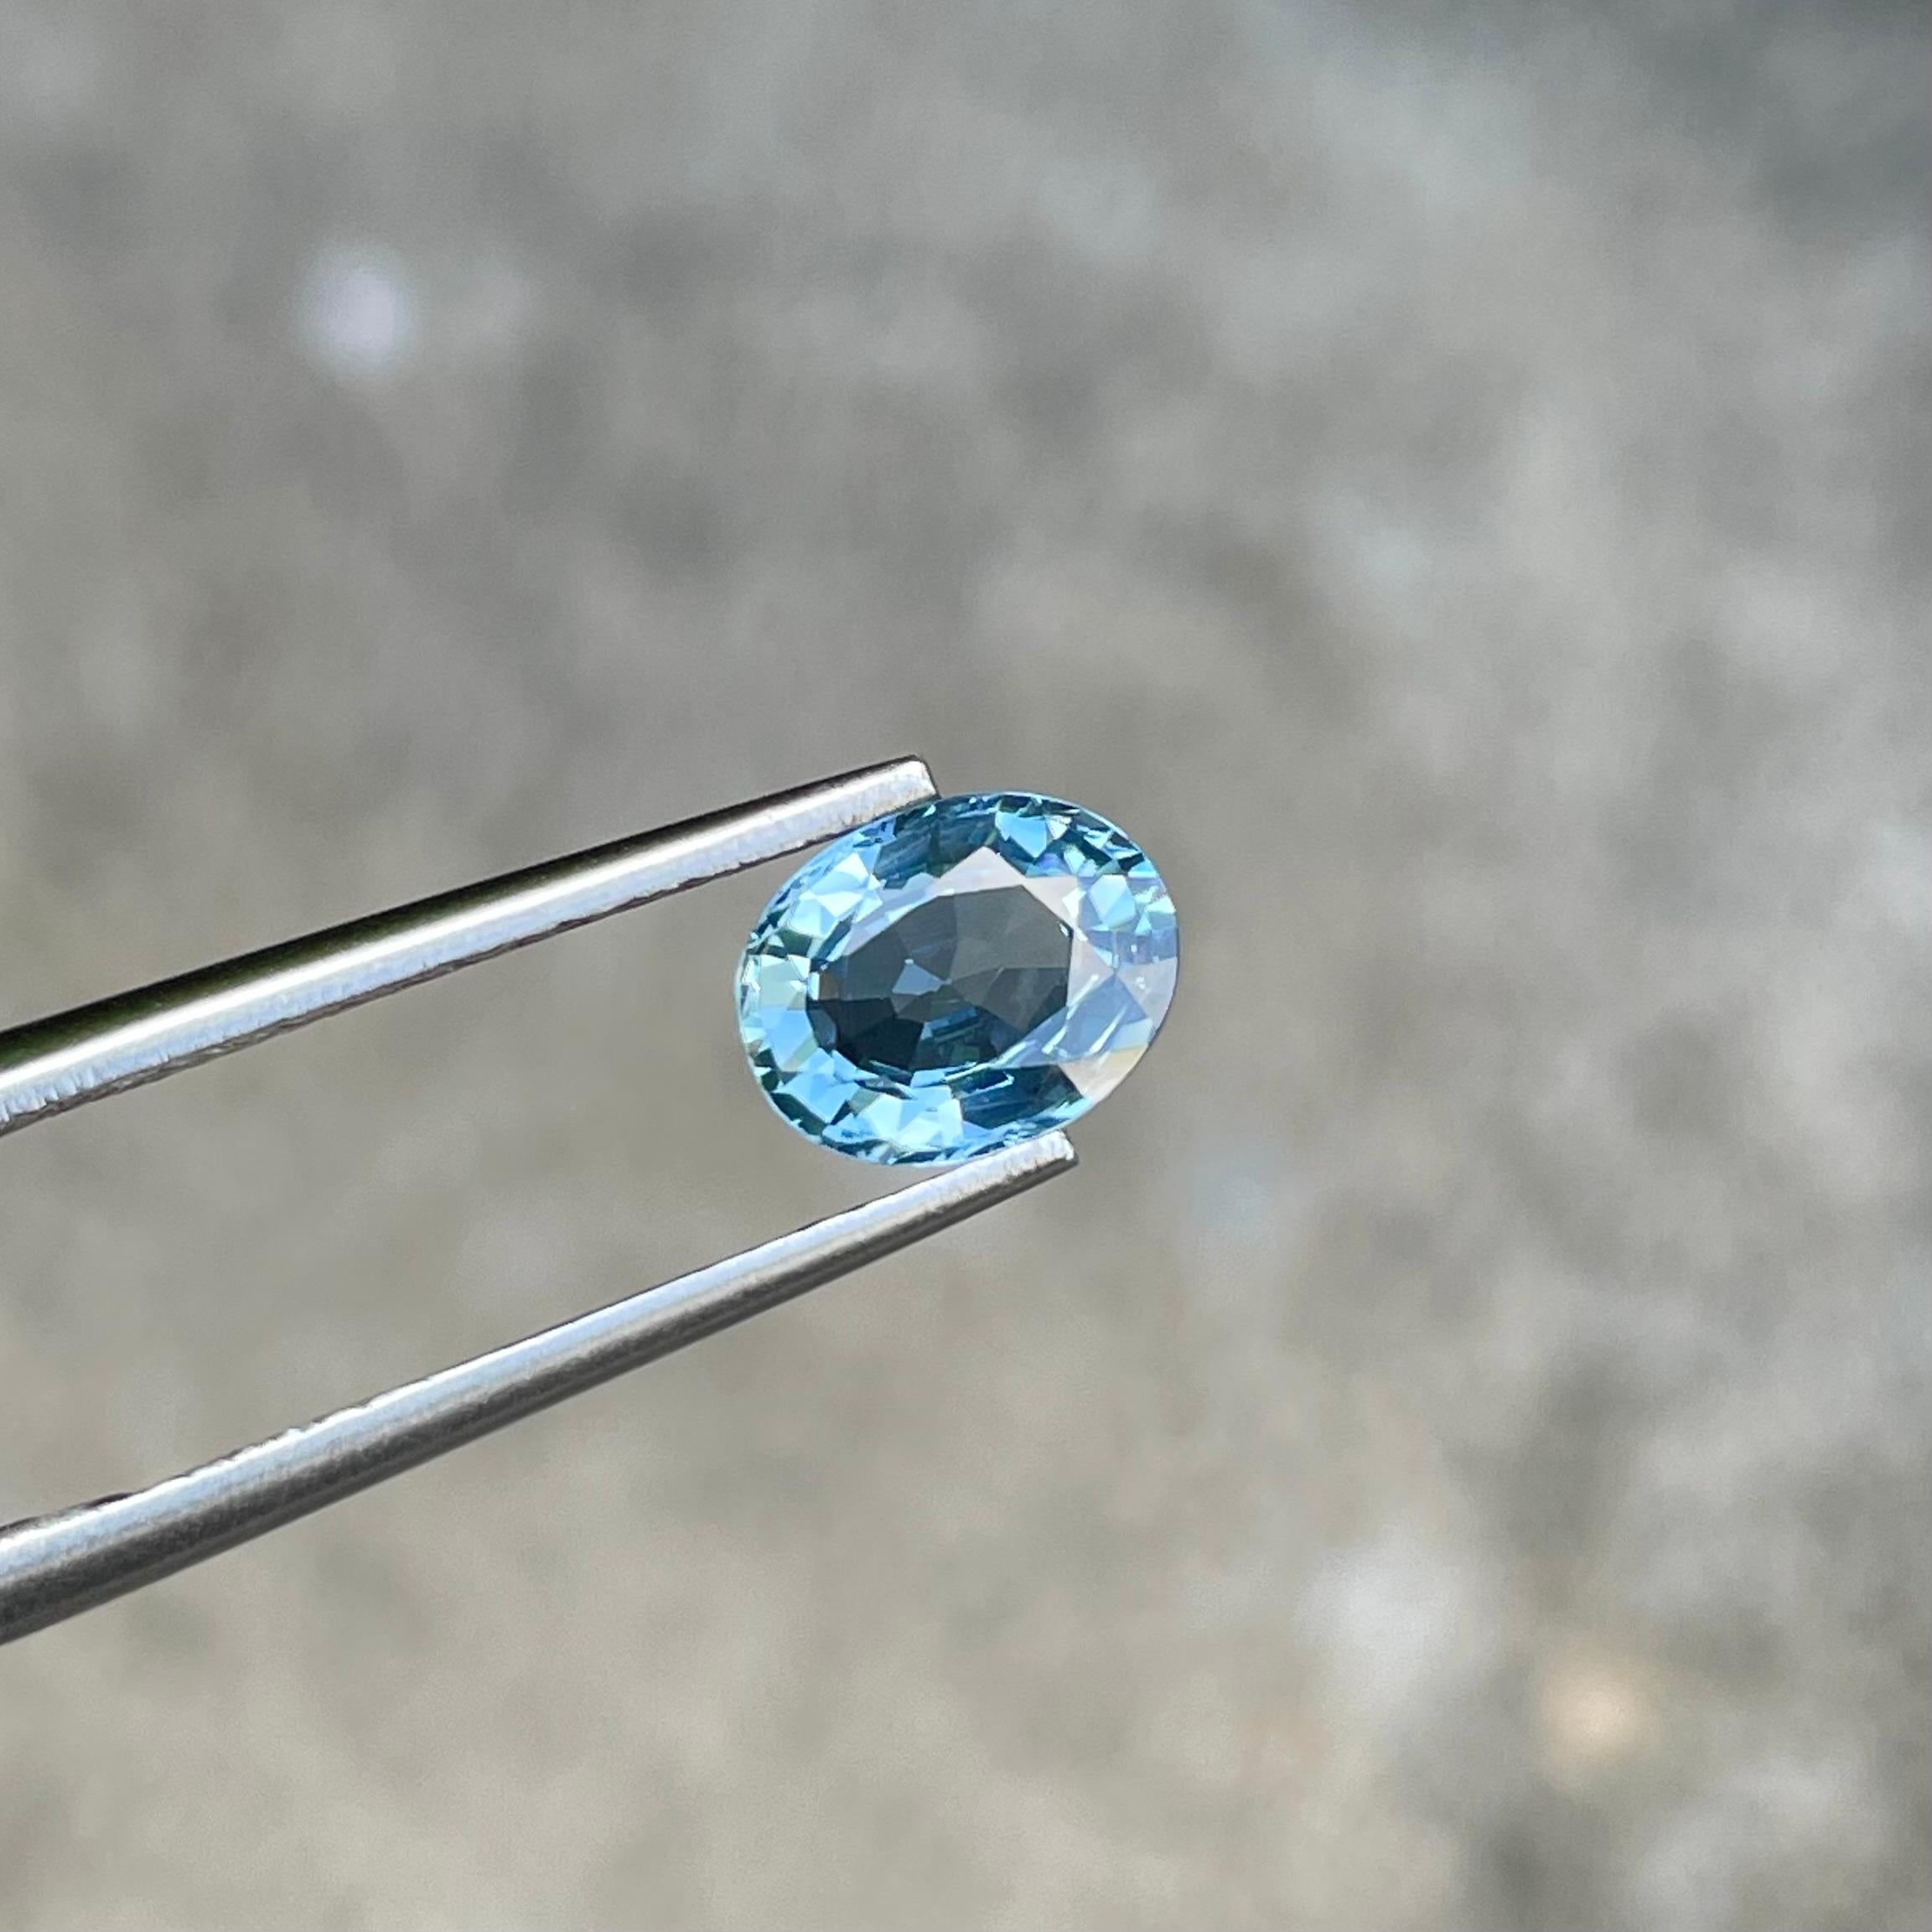 Weight 1.35 carats 
Dimensions 7.6x6.0x3.4 mm
Clarity: Eye Clean
Treatment: Heat
Origin: Sri lanka
Shape: Oval
Cut: Step Oval




Introducing the enchanting Light Blue Sapphire, a truly captivating gemstone that embodies sophistication and grace.